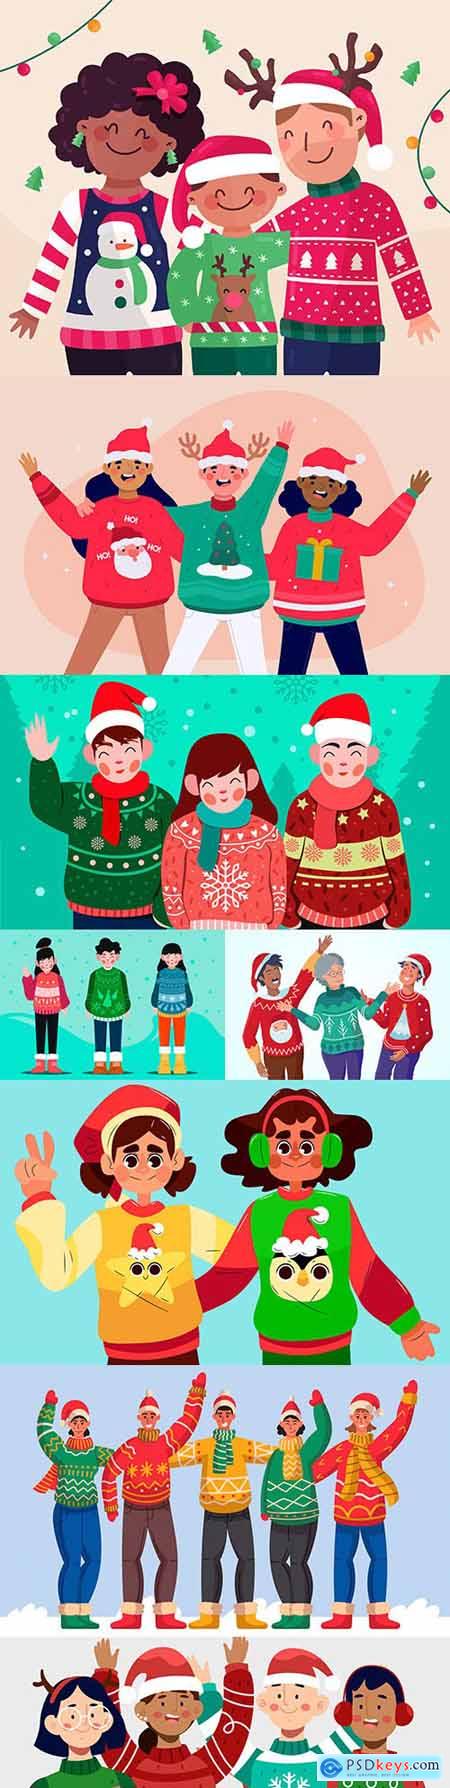 Happy people in knit sweaters with Christmas characters